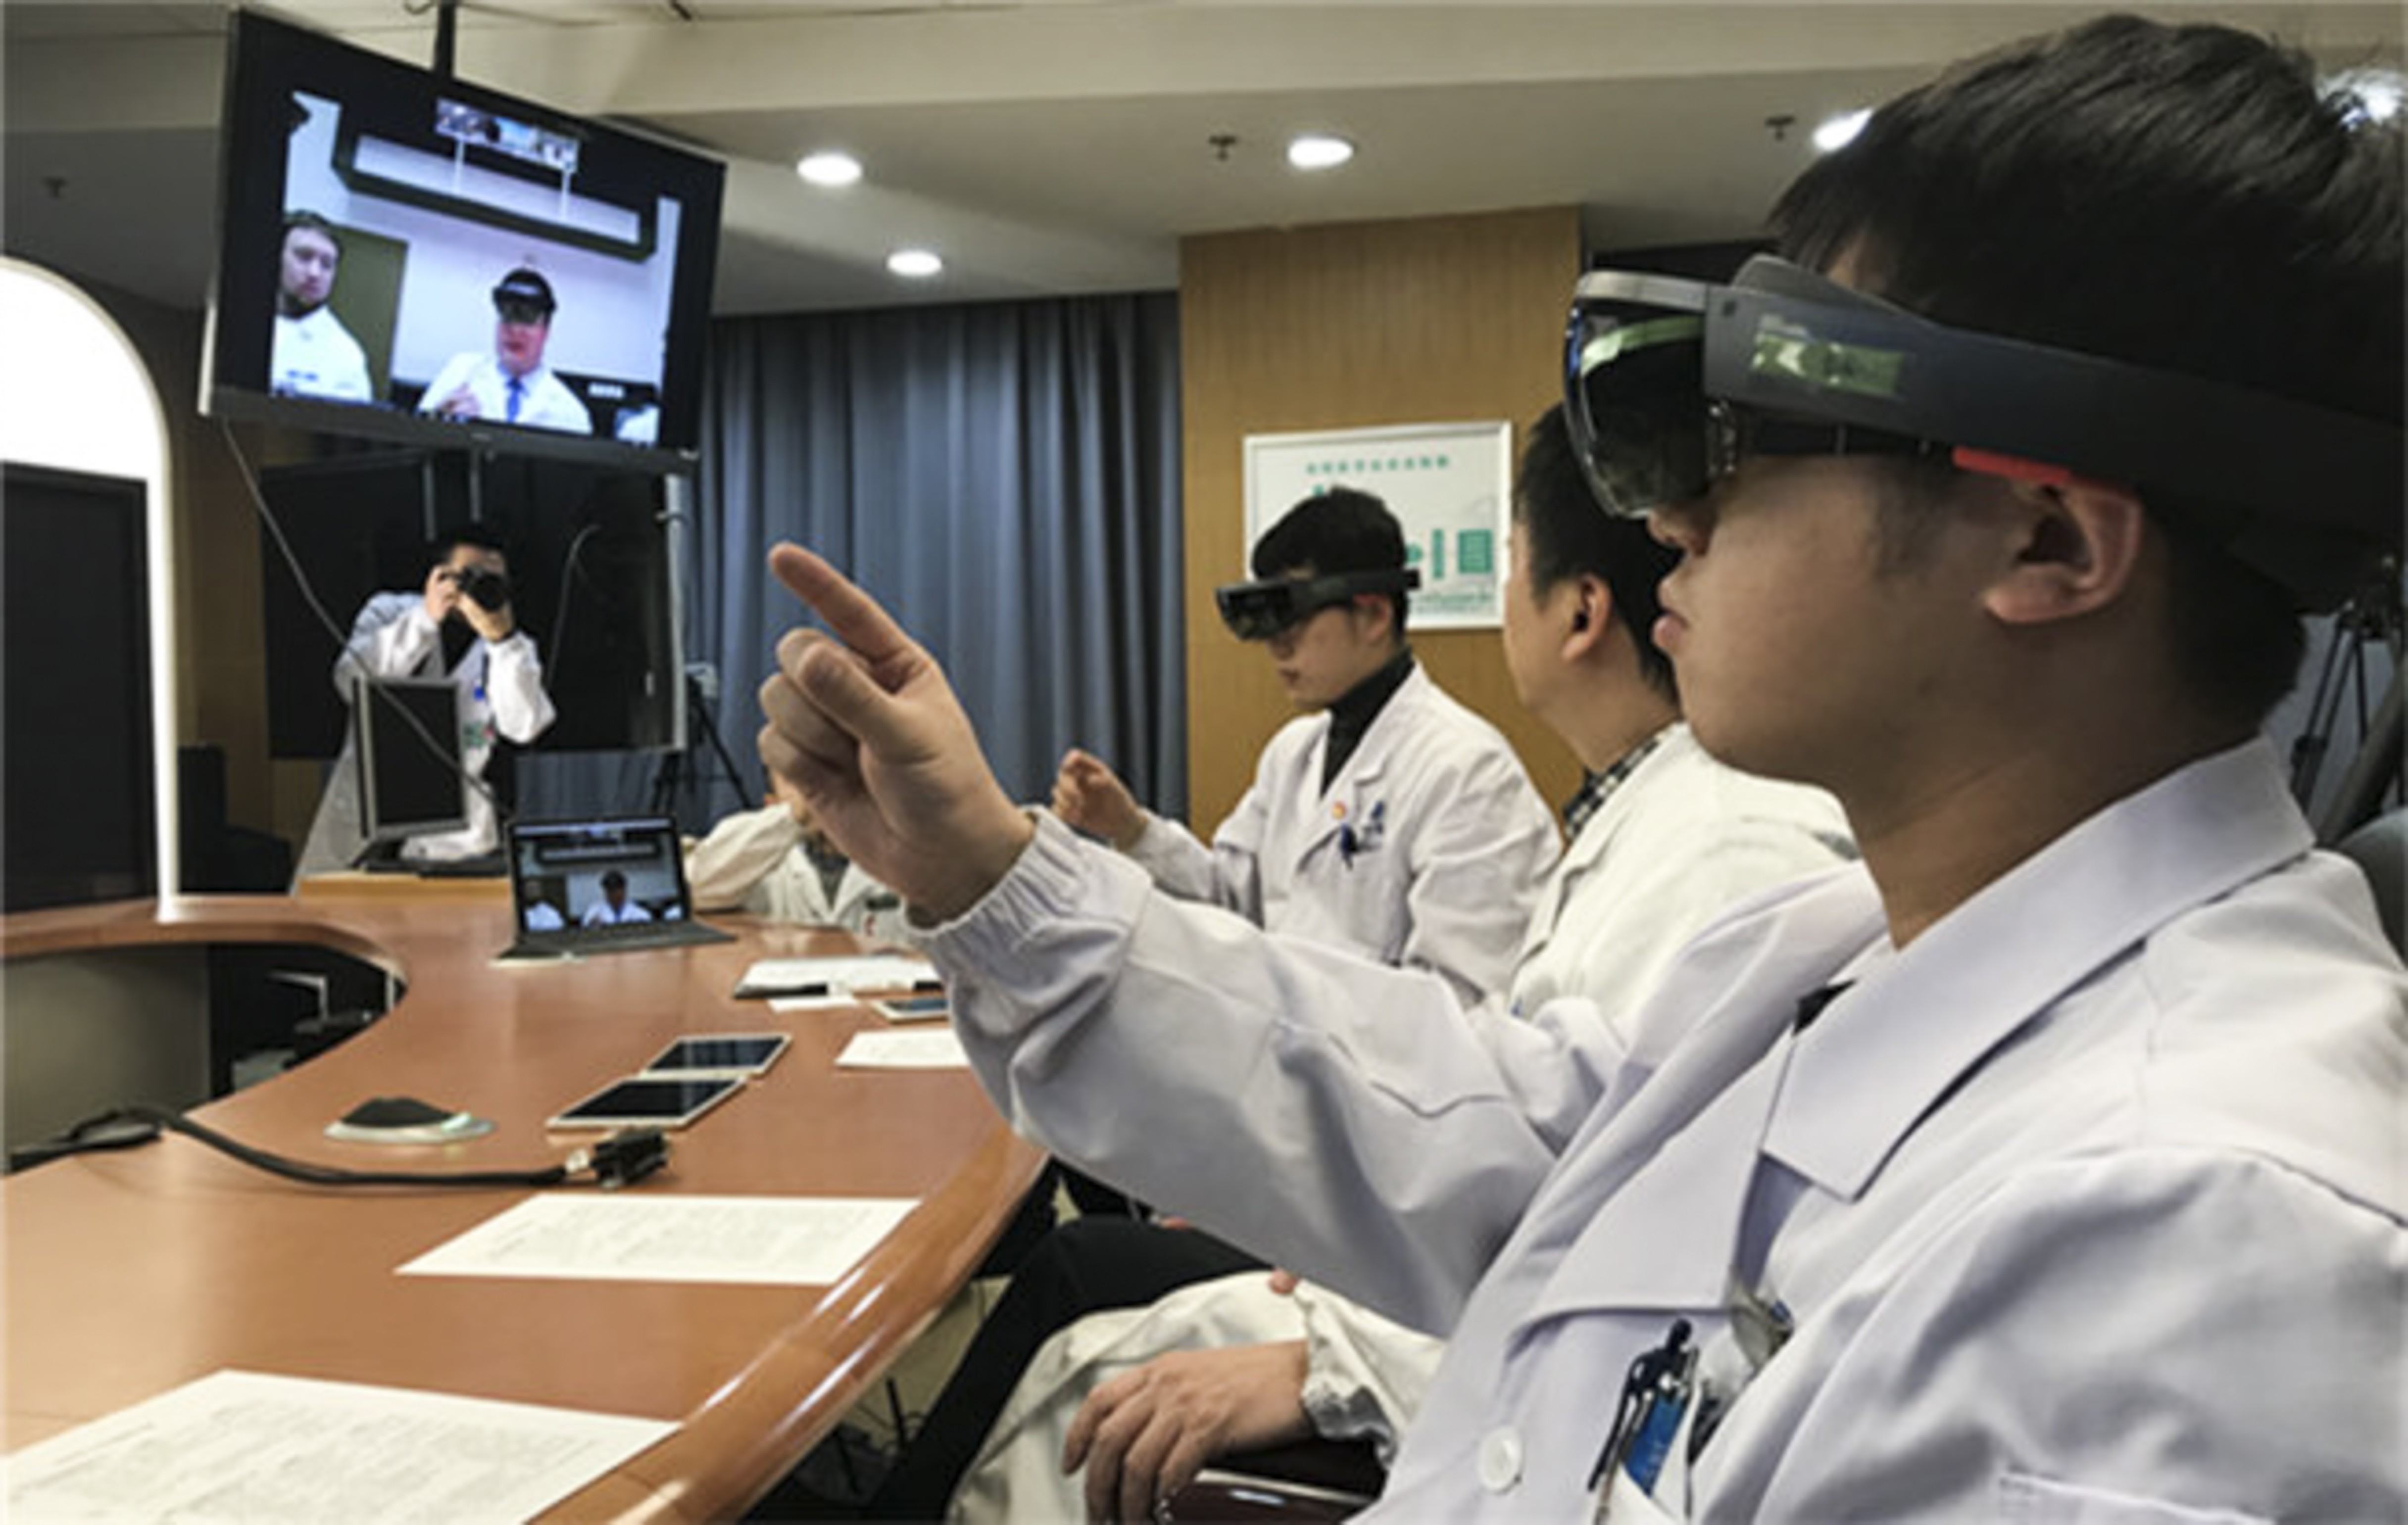 Medical staff in the two hospitals communicate through their 3D imaging headsets. Photo: New.qq.com